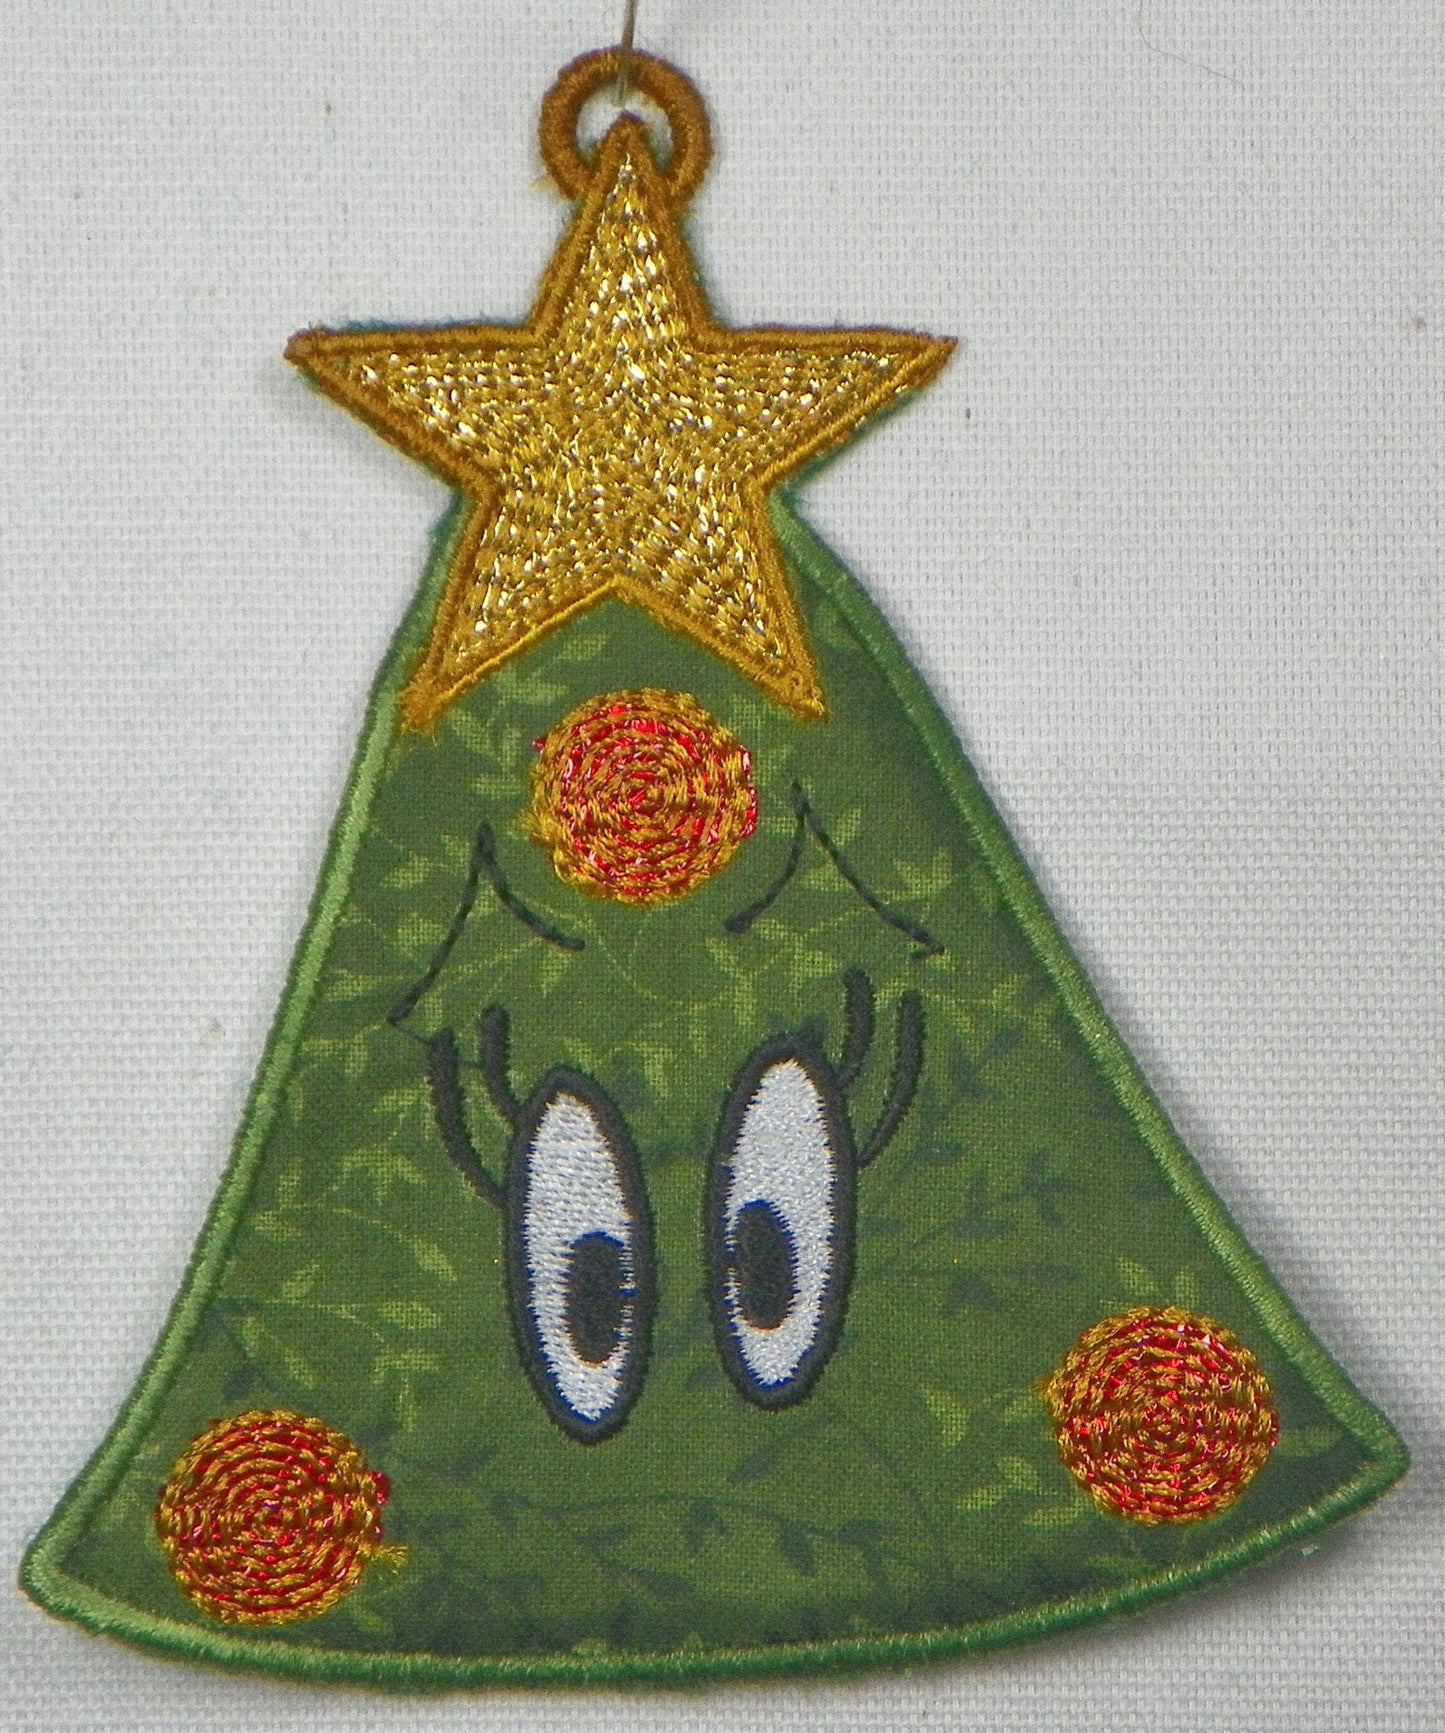 Freestanding Applique Christmas Tree Projects for  [5x7] or  [6x10] # 10418